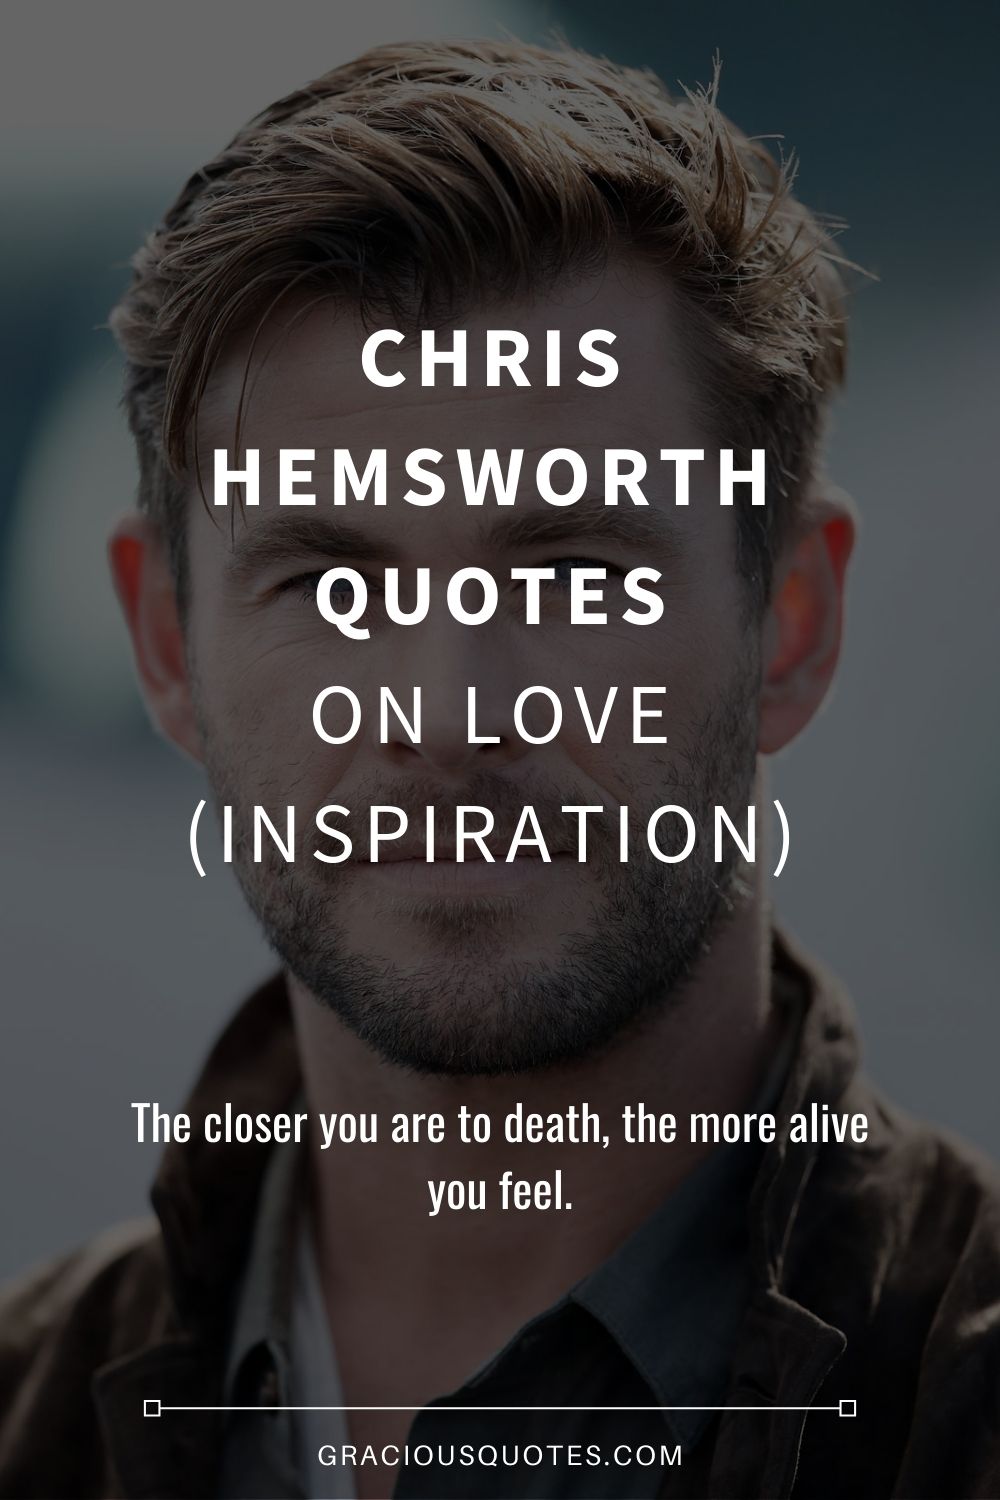 Chris Hemsworth Quotes on Love (INSPIRATION) - Gracious Quotes